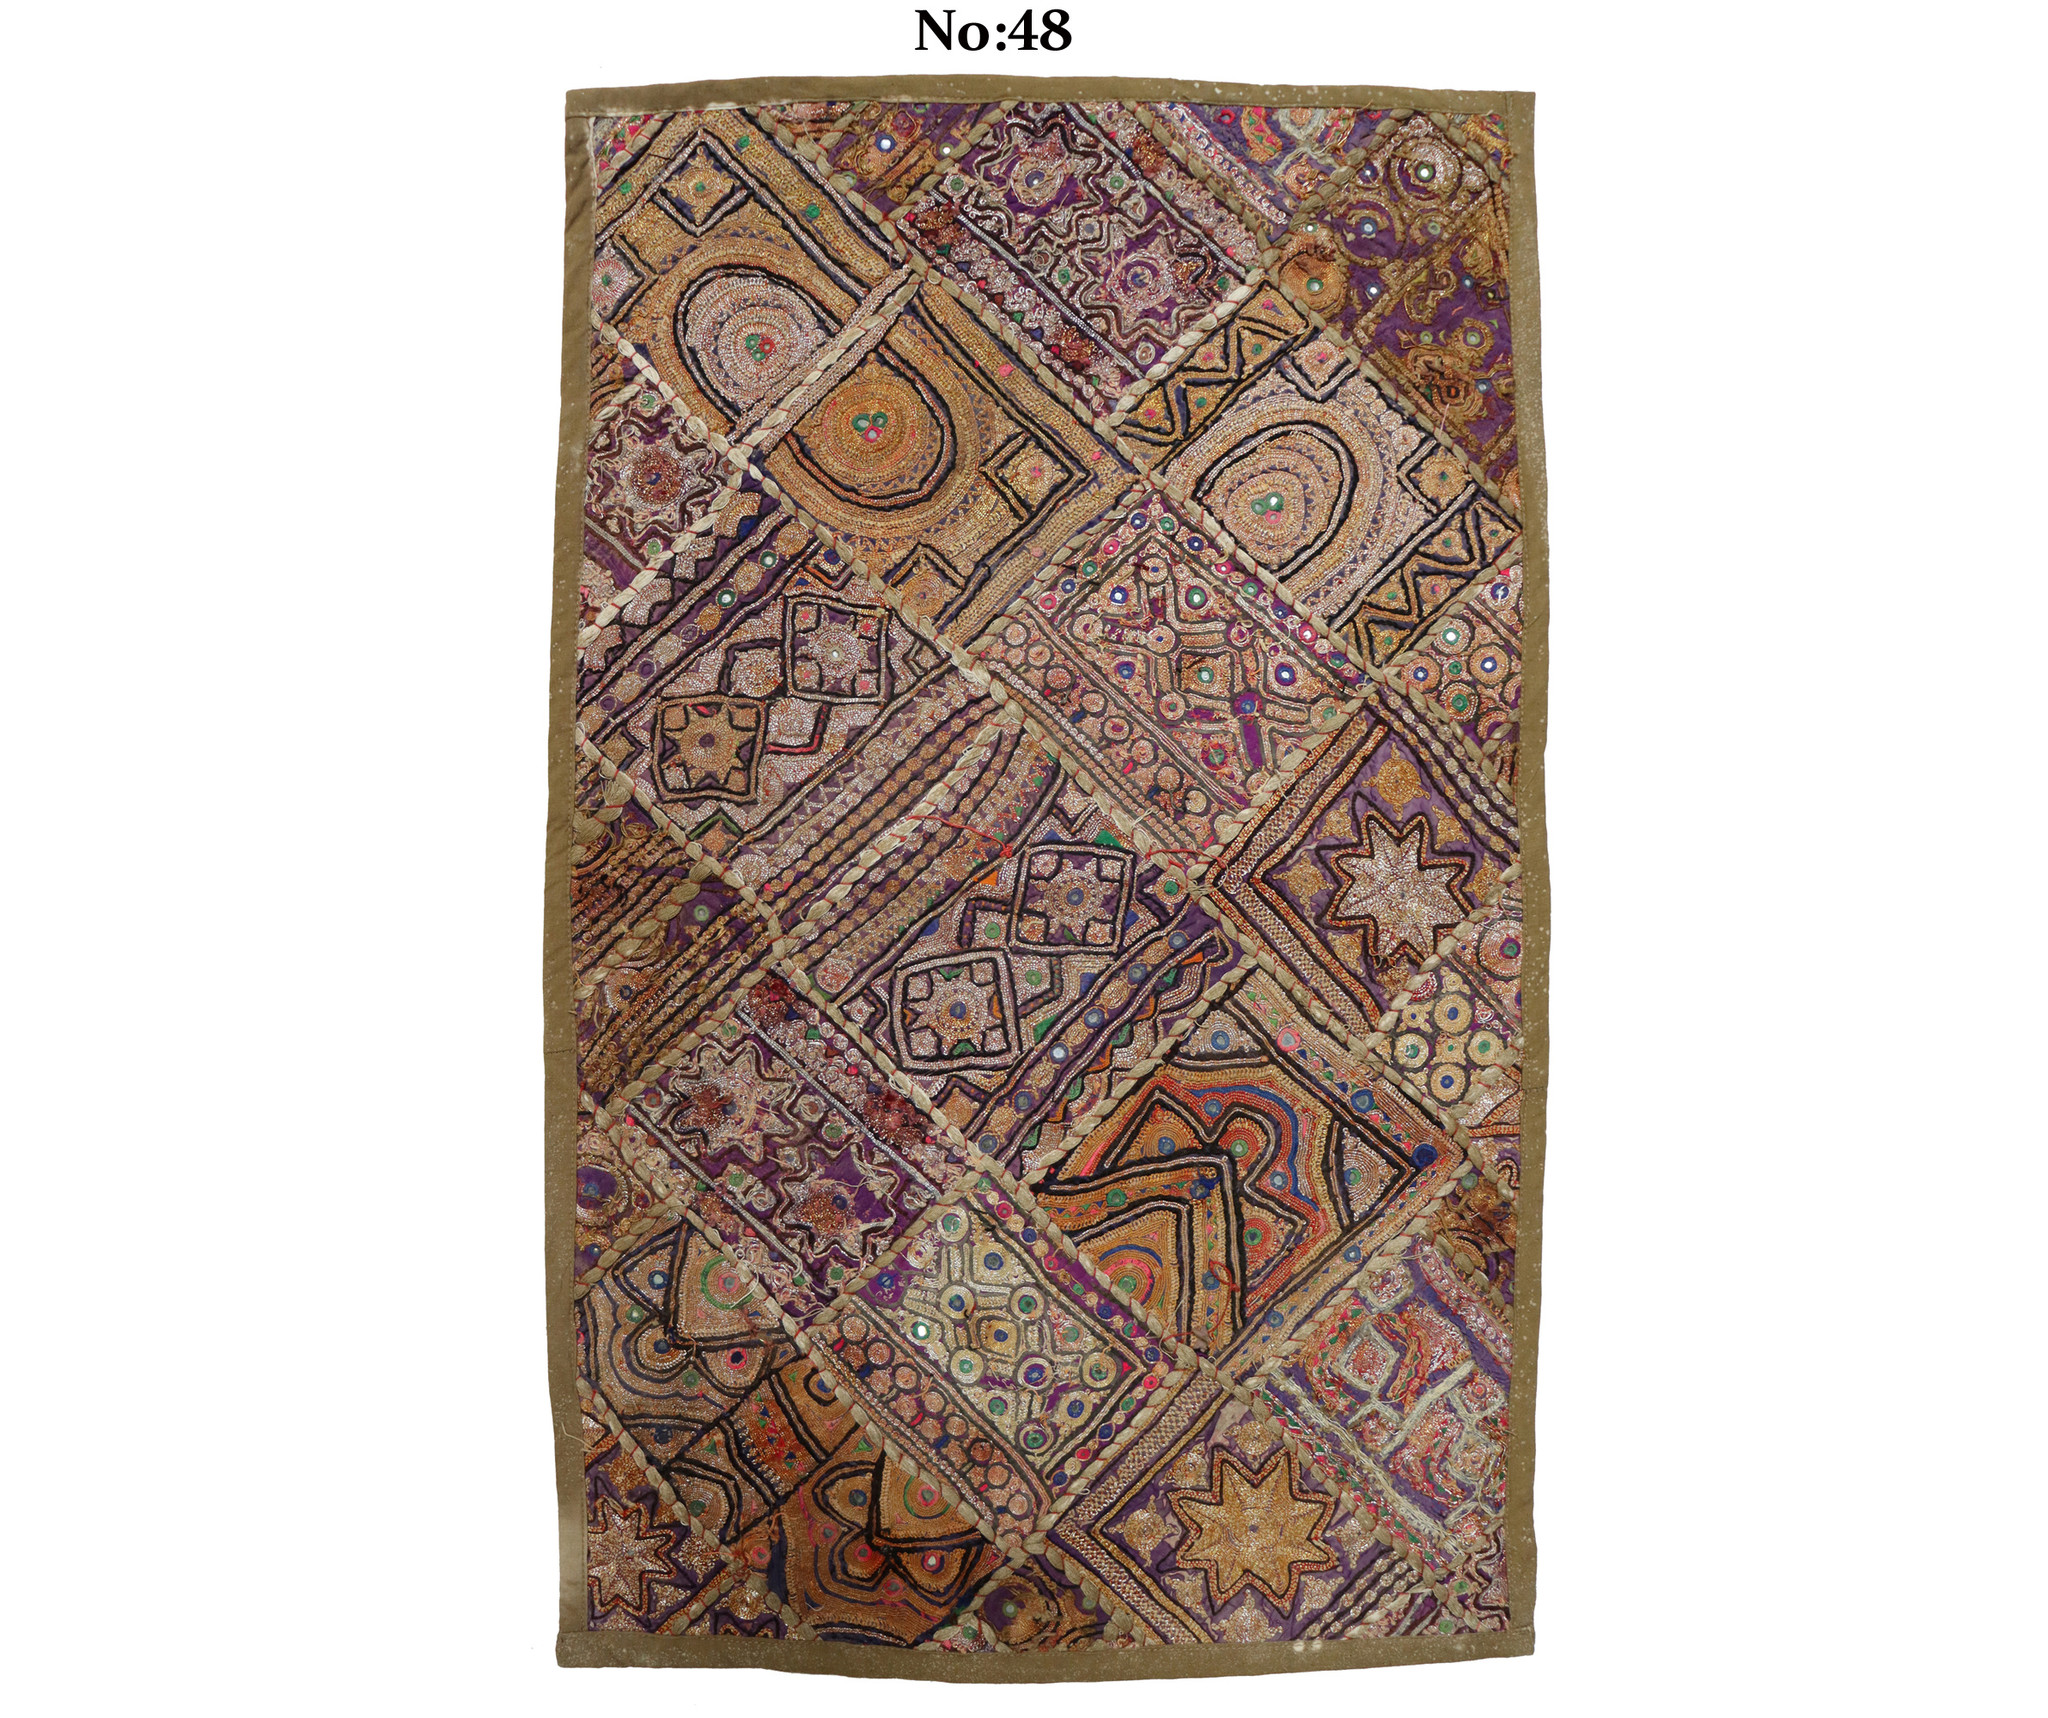 87x53  cm vintage  hand Embroidered Patchwork wall hanging No: GD - 48